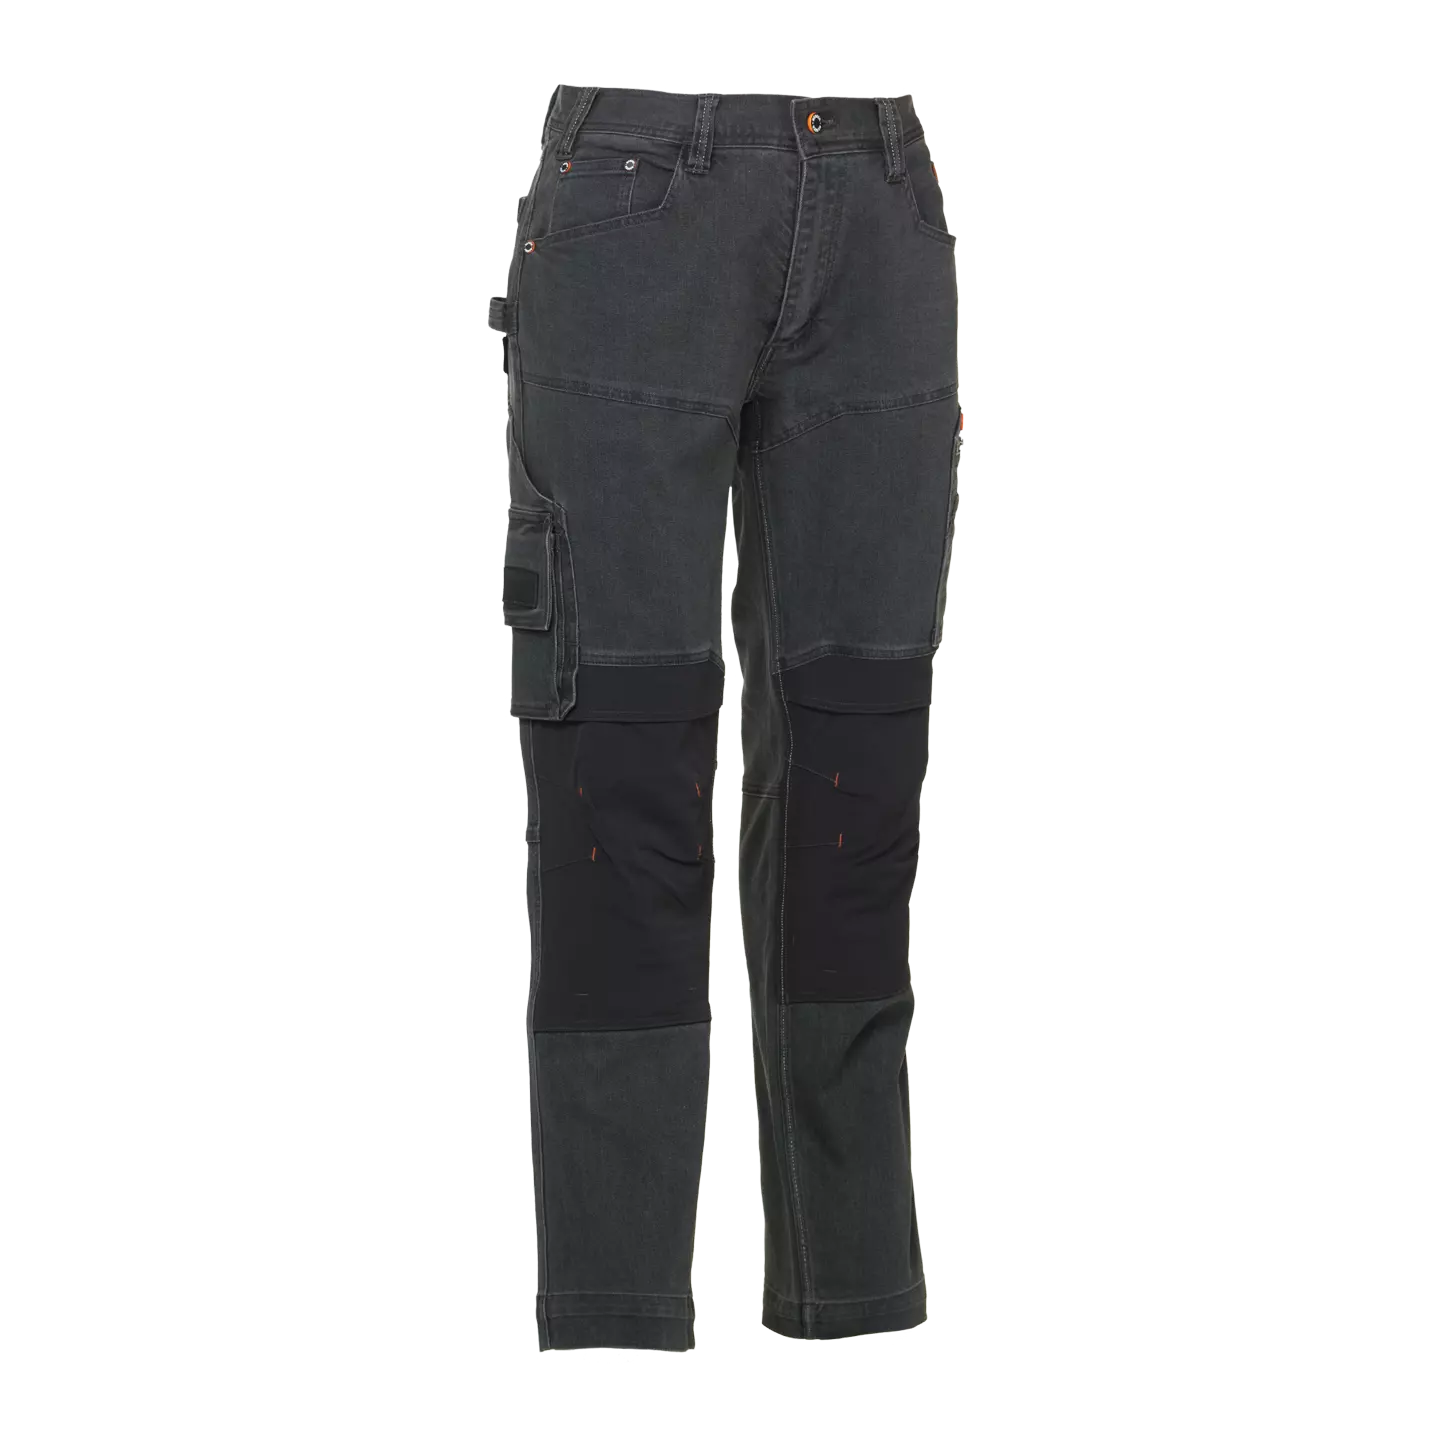 Sphinx Trousers Grey Jeans 42